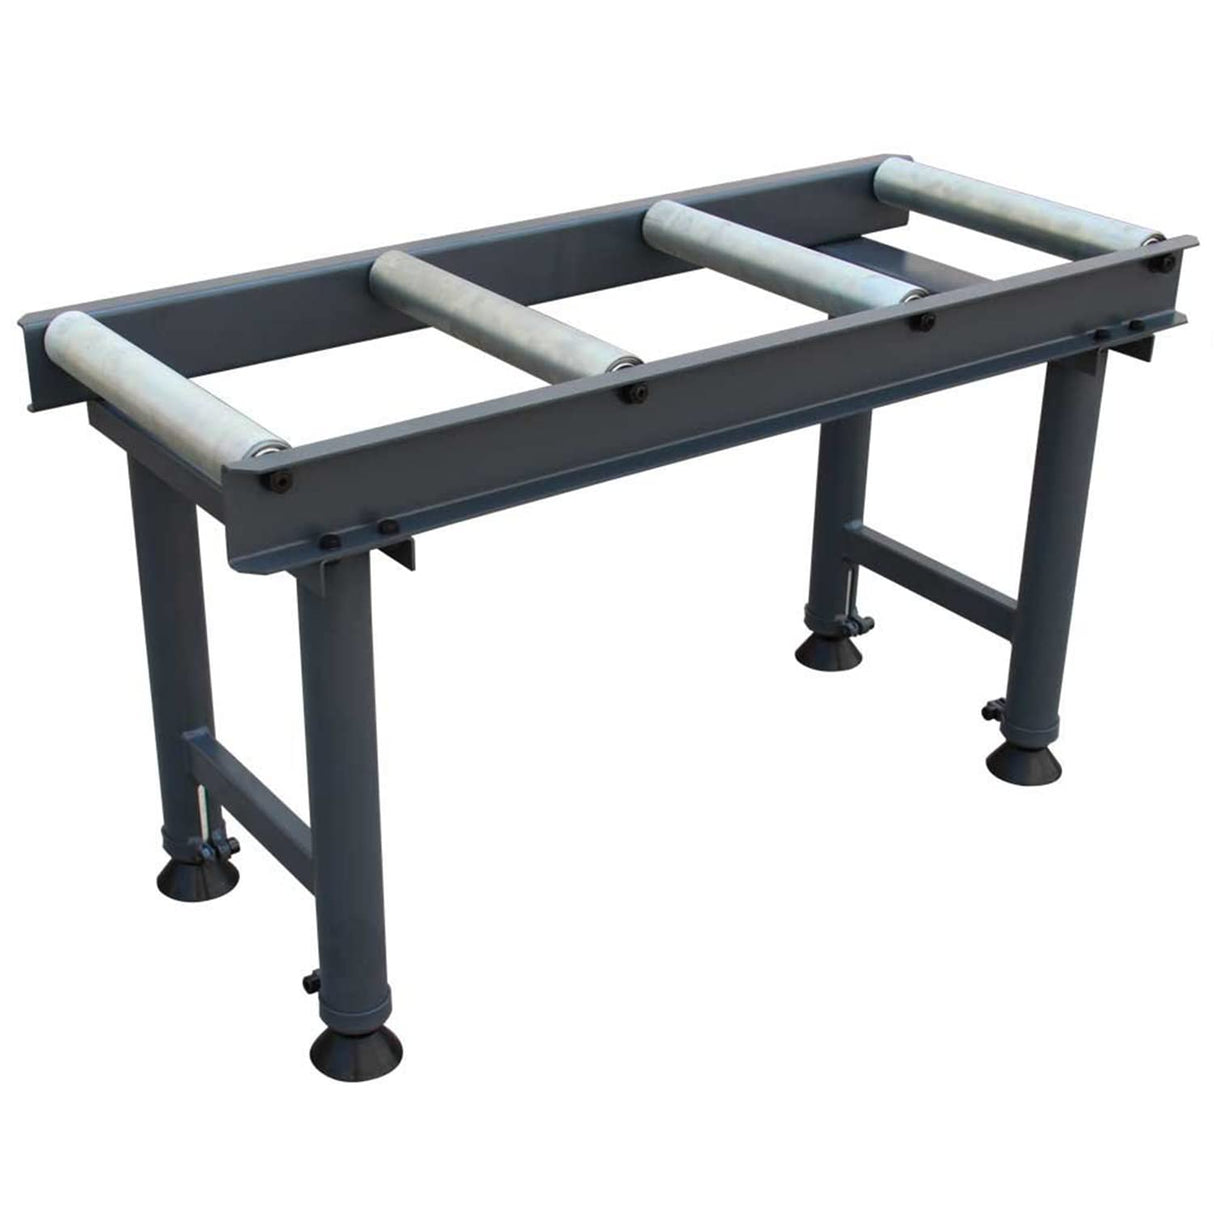 KANG RB-365 Stands and Supports Heavy-Duty 4 Roller Table 600kg Capacity, Roller Conveyor with Adjustable Stands